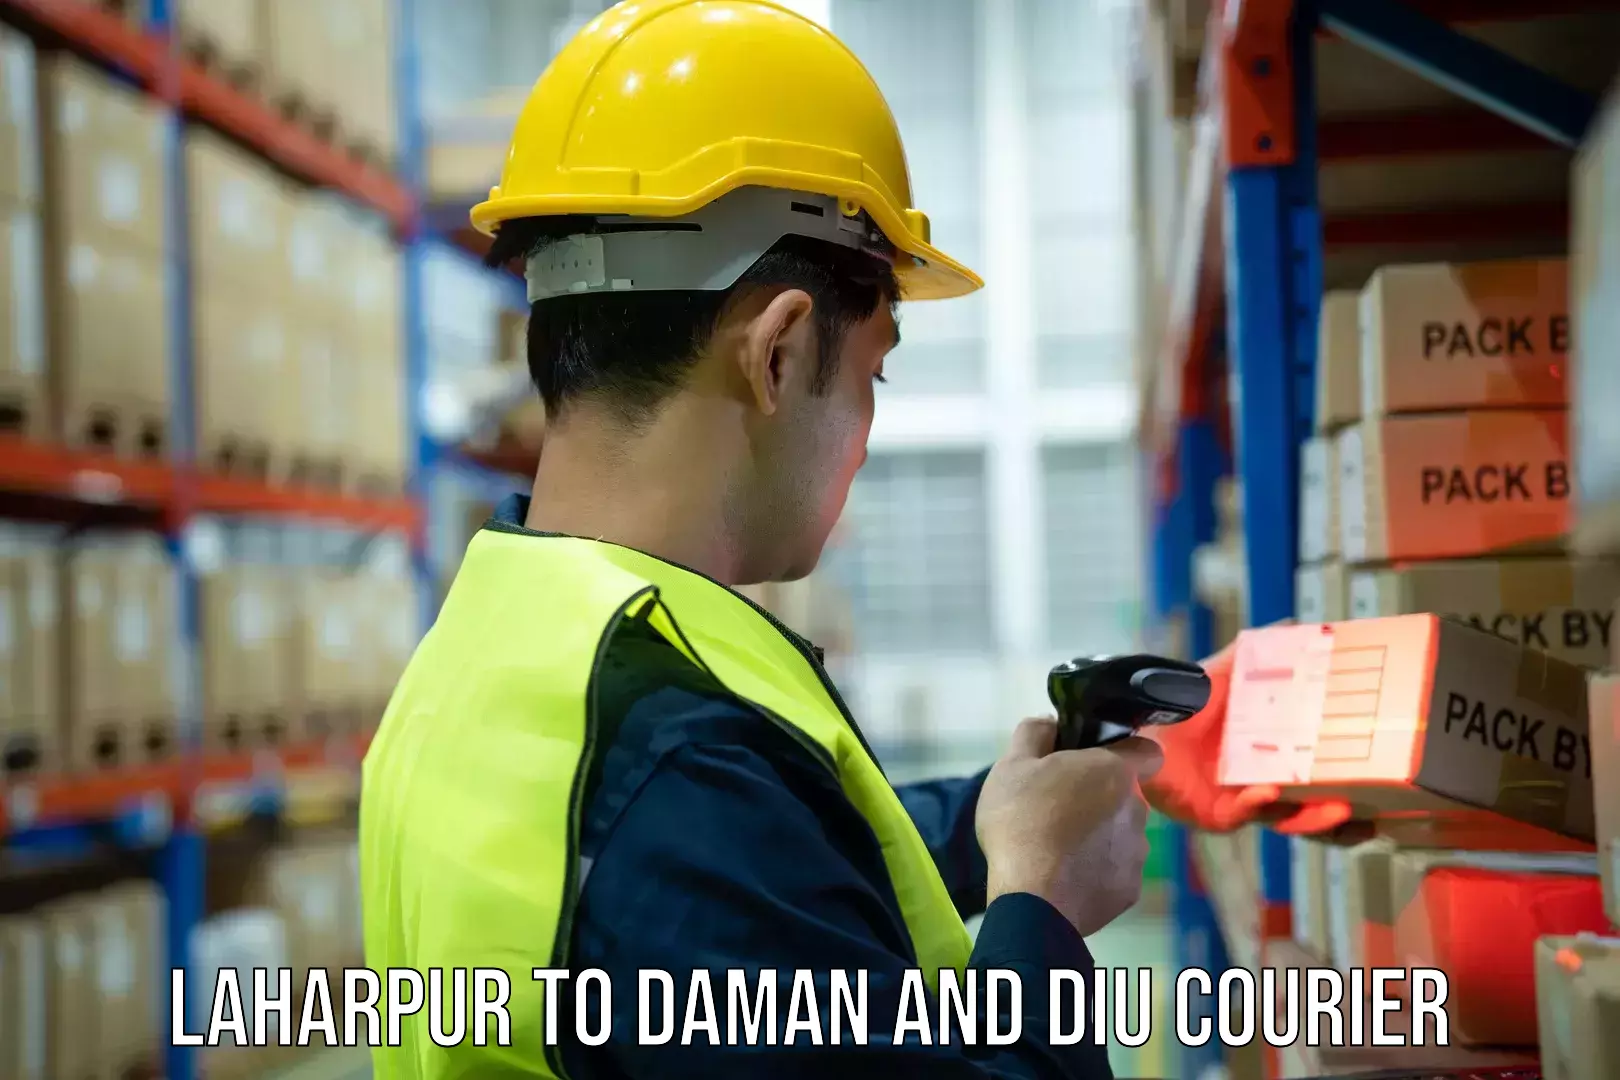 Supply chain delivery Laharpur to Diu